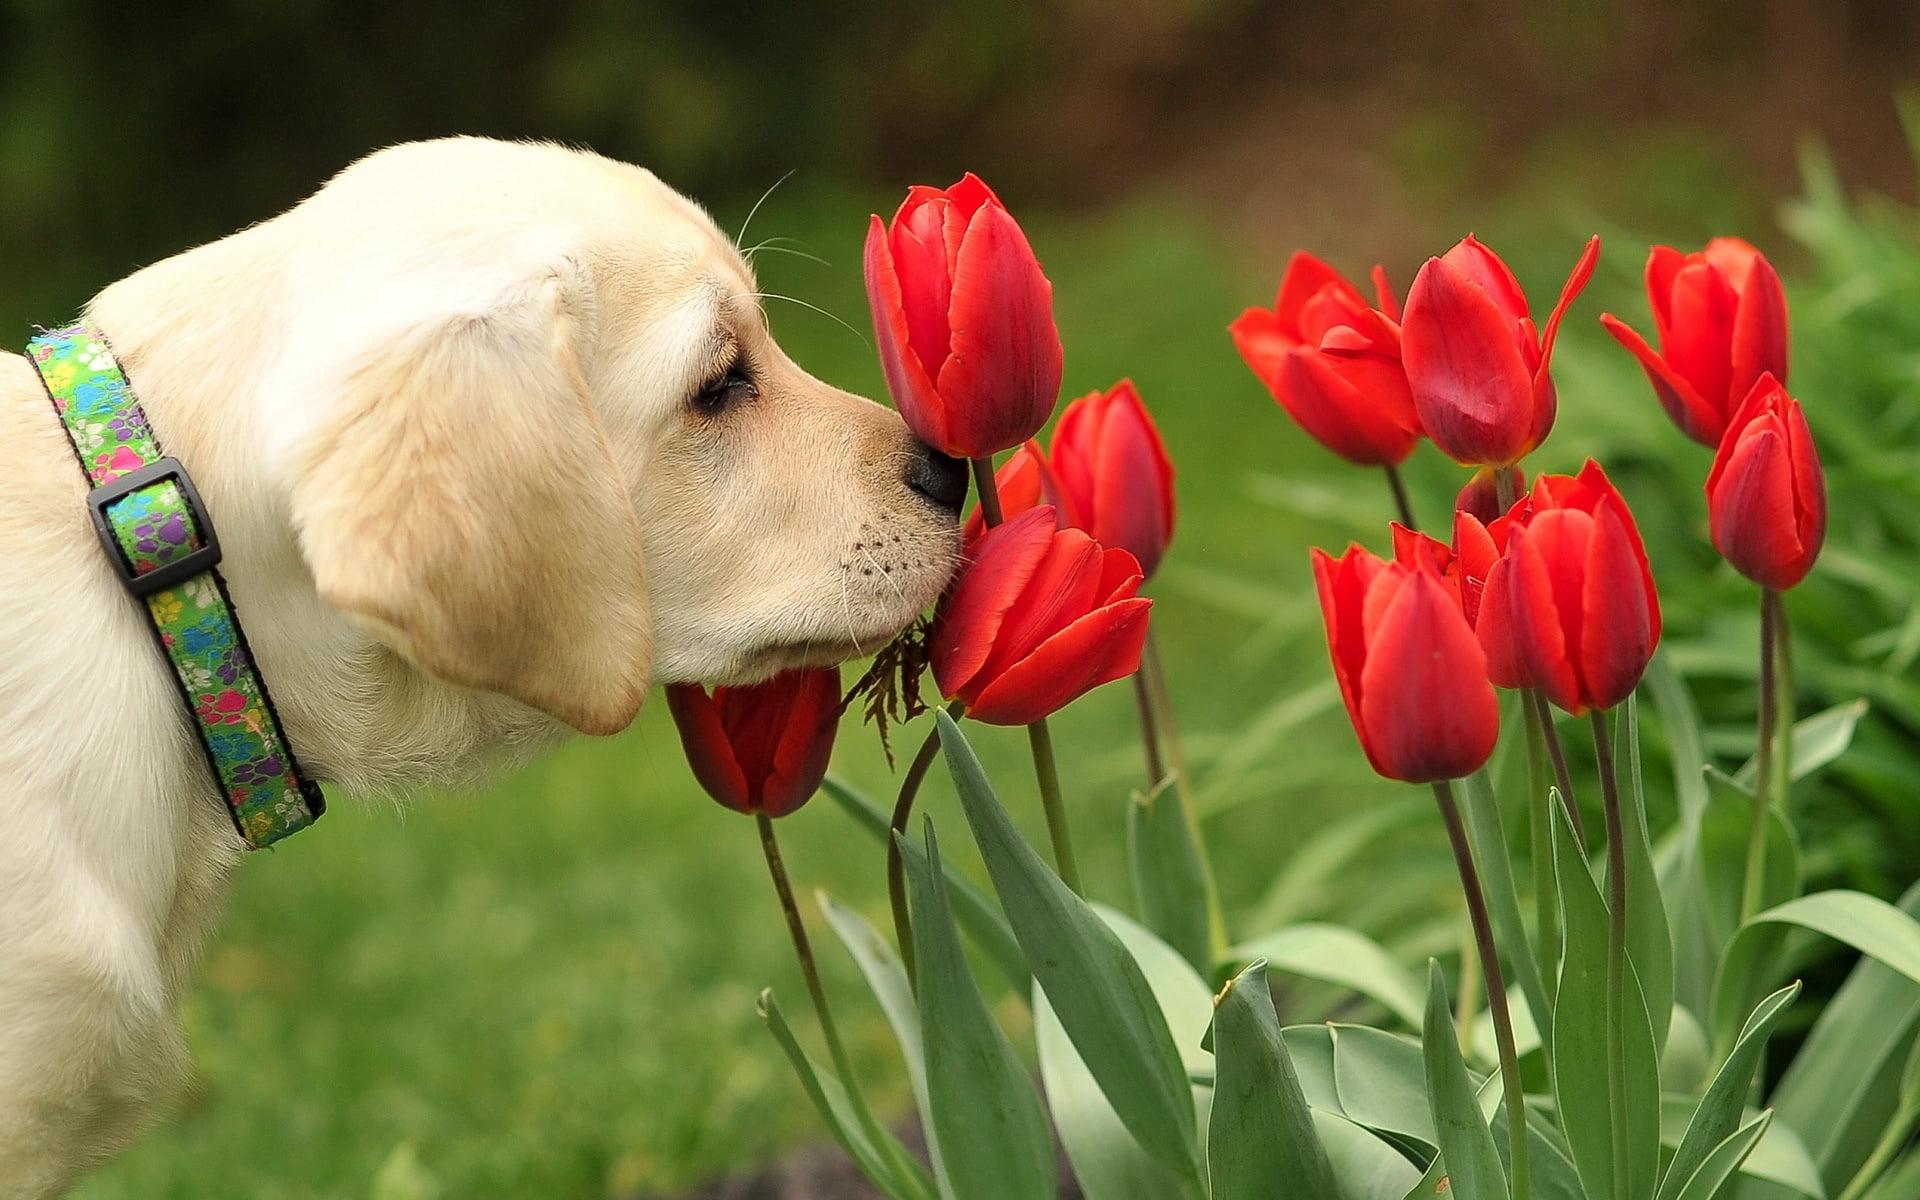 yellow Labrador retriever puppy and red tulip flowers, dog, nature